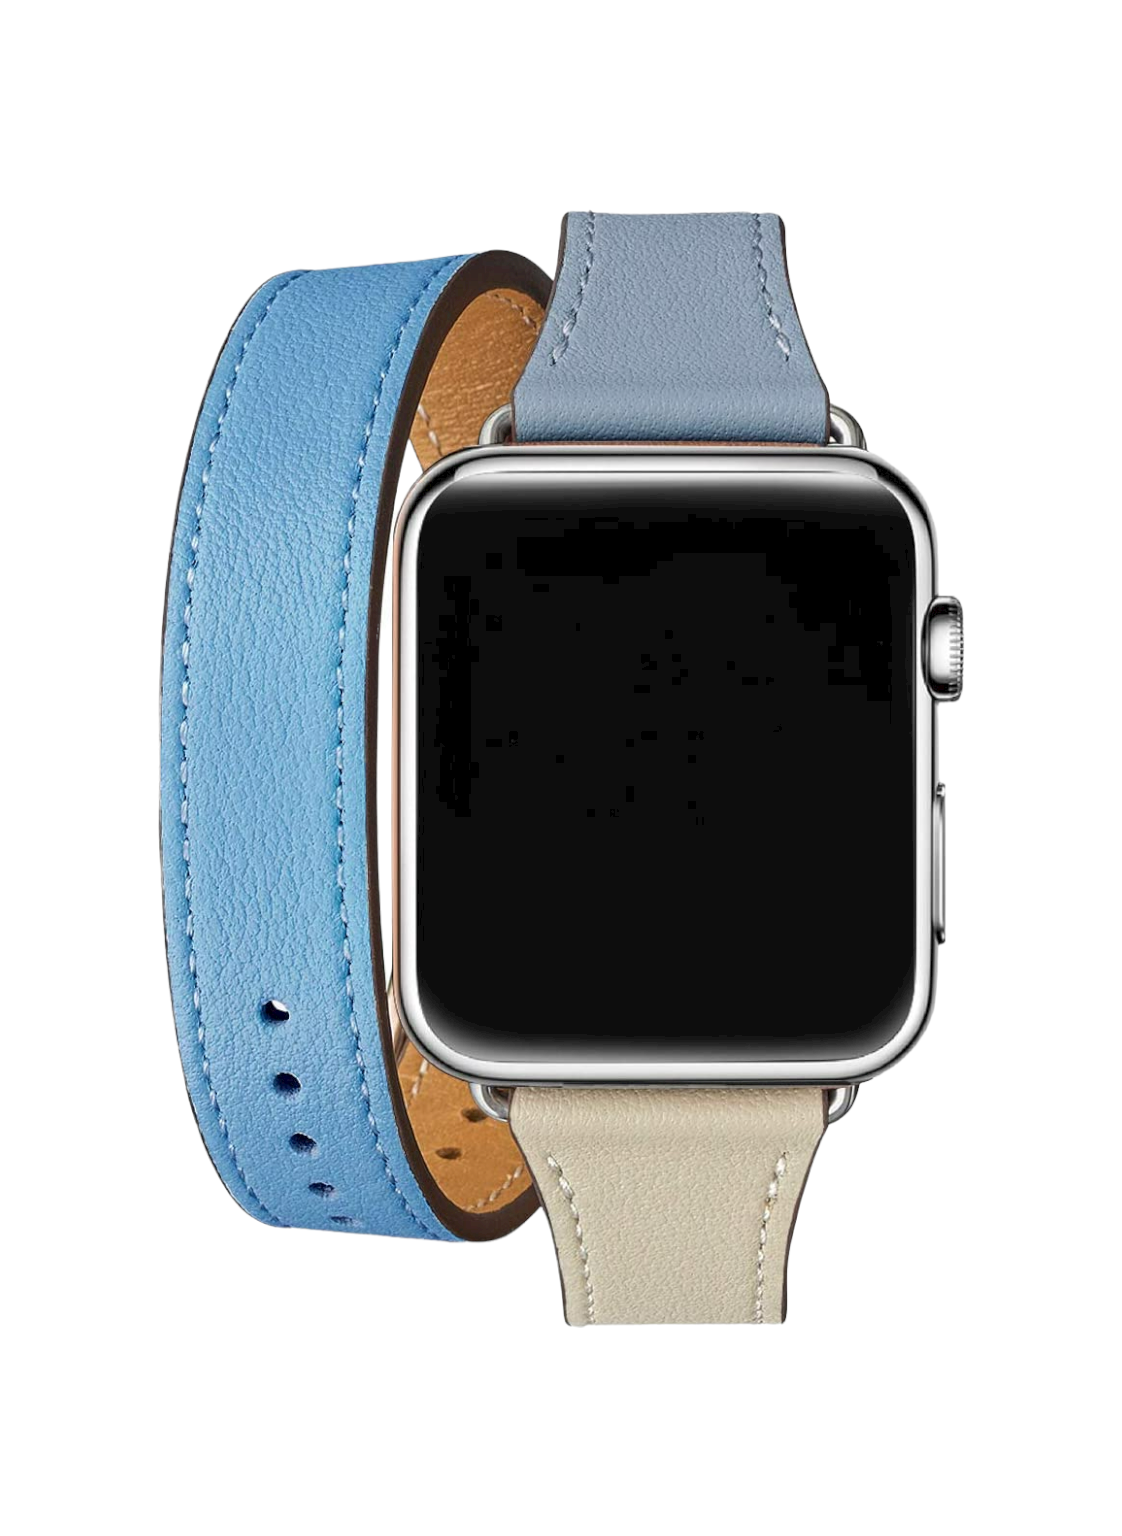 iWatch Double Loop Strap